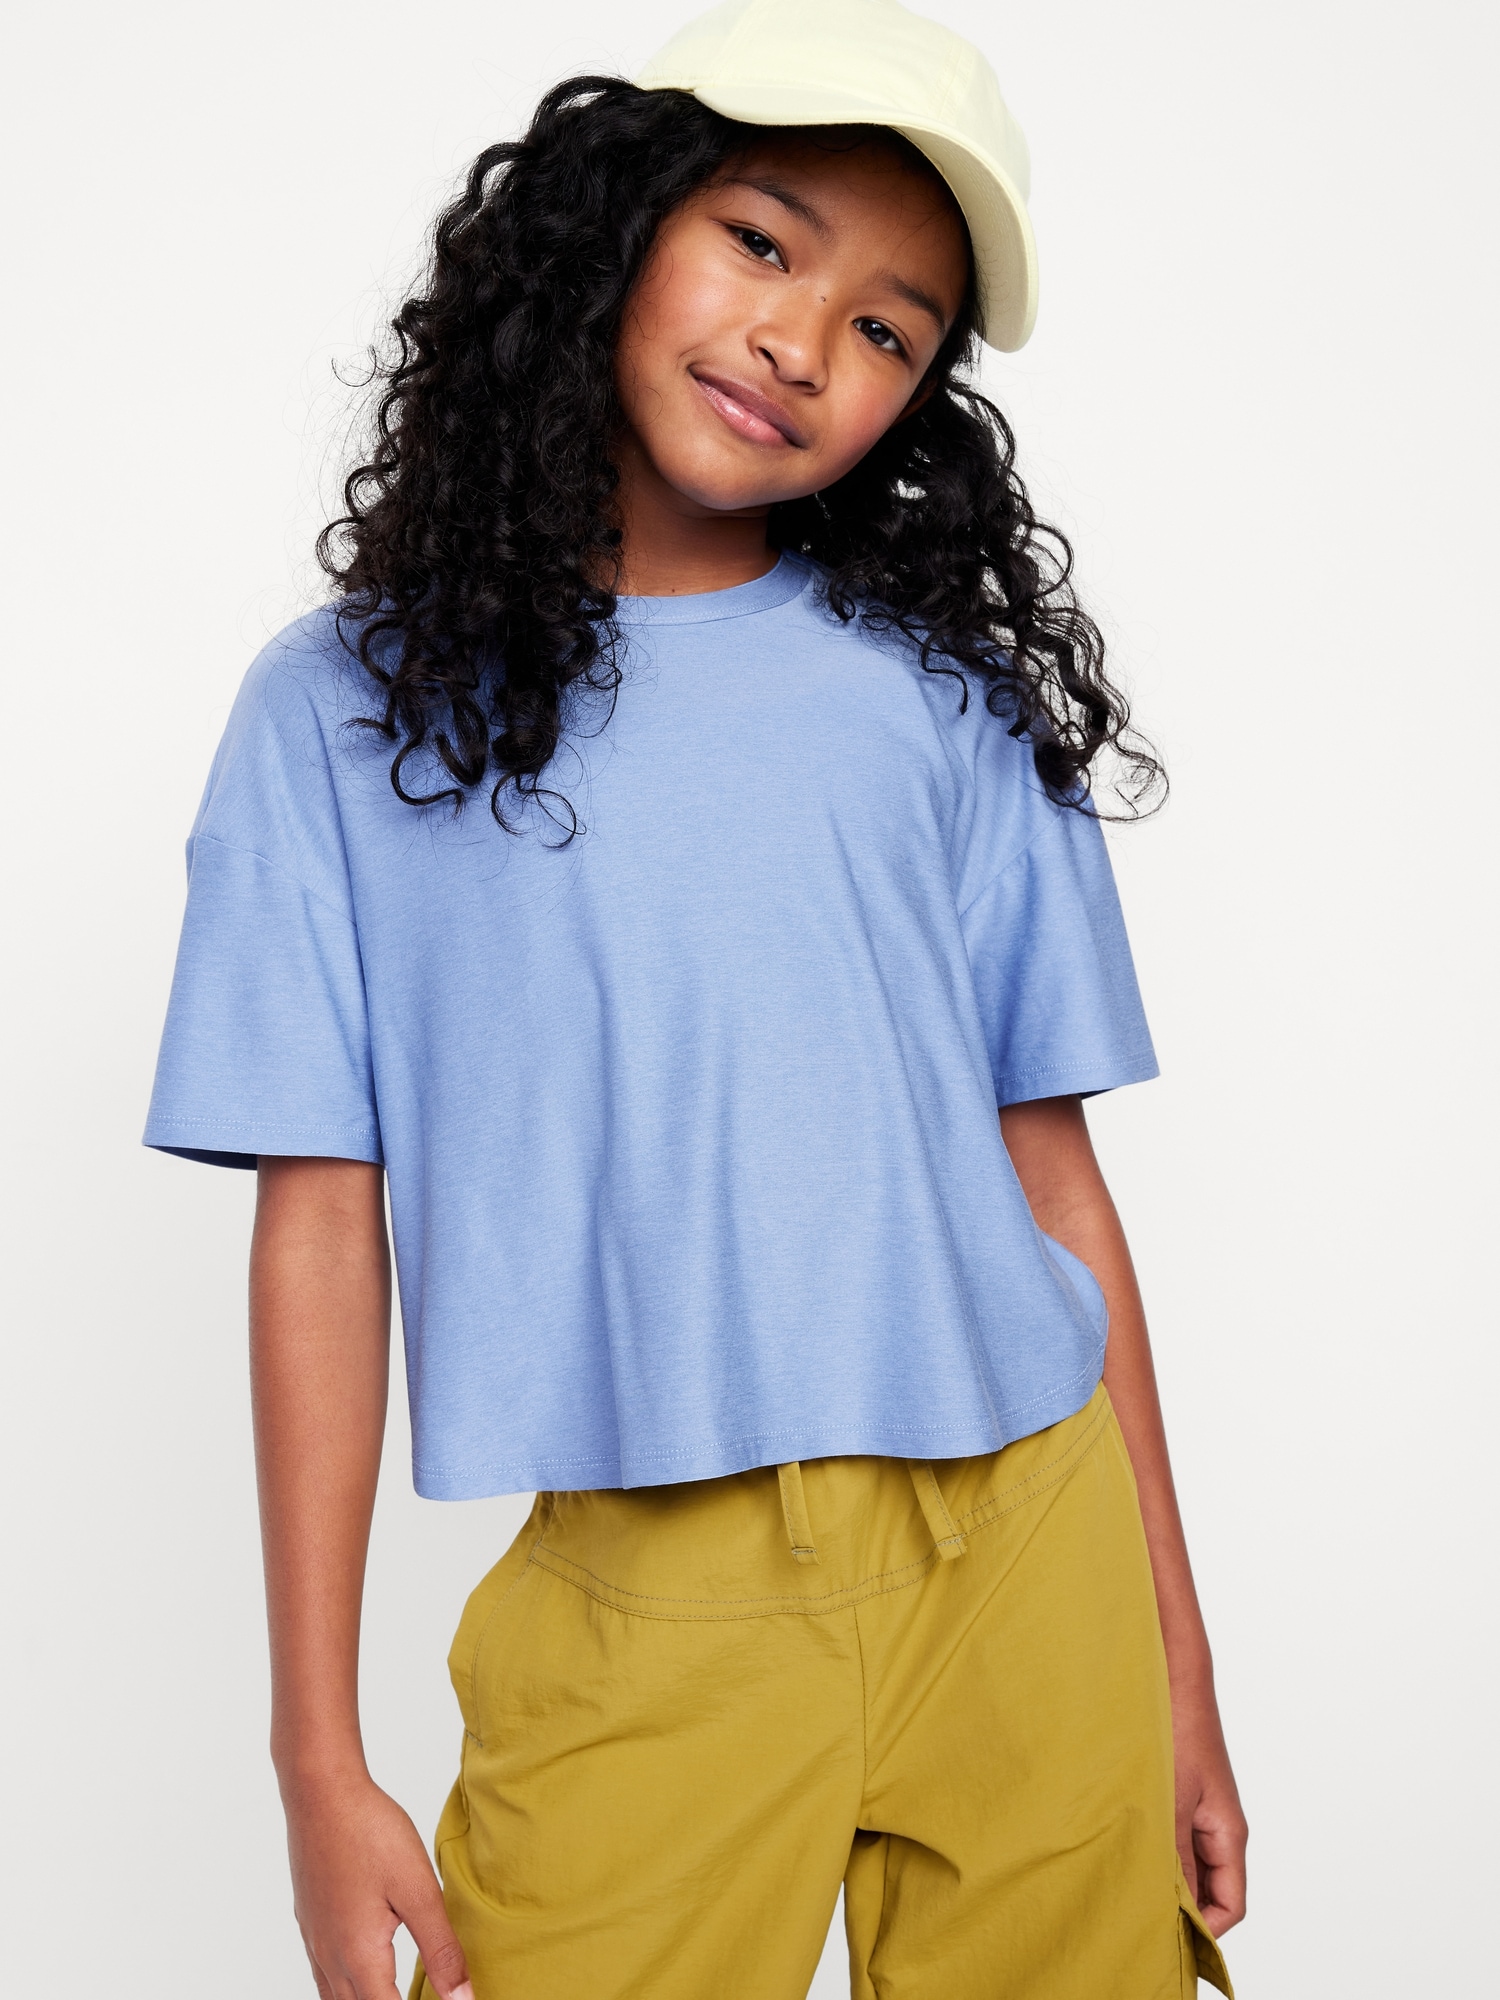 Cloud 94 Soft Go-Dry Cool Cropped T-Shirt for Girls Hot Deal